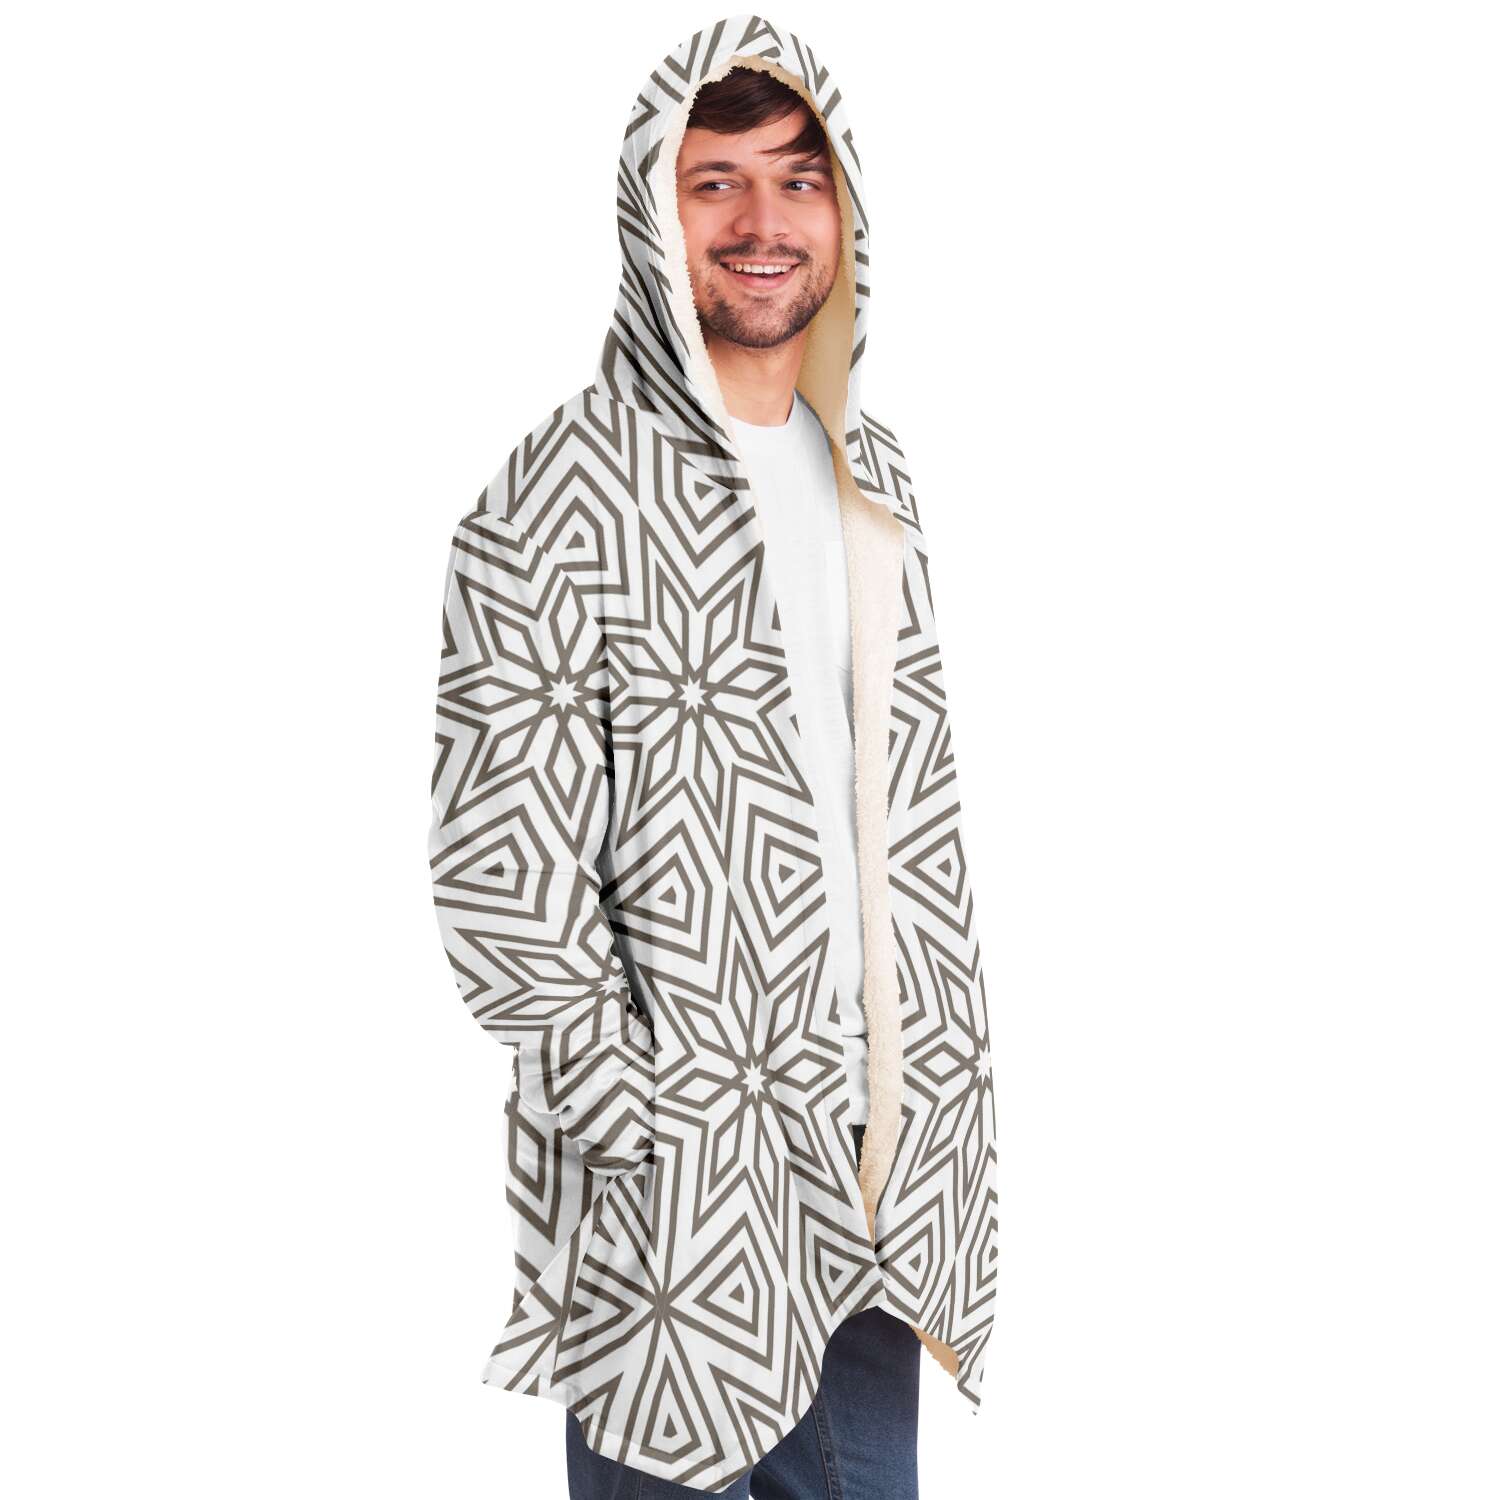 The Miracle of the East Prince of Persia Microfleece Cloak DromedarShop.com Online Boutique